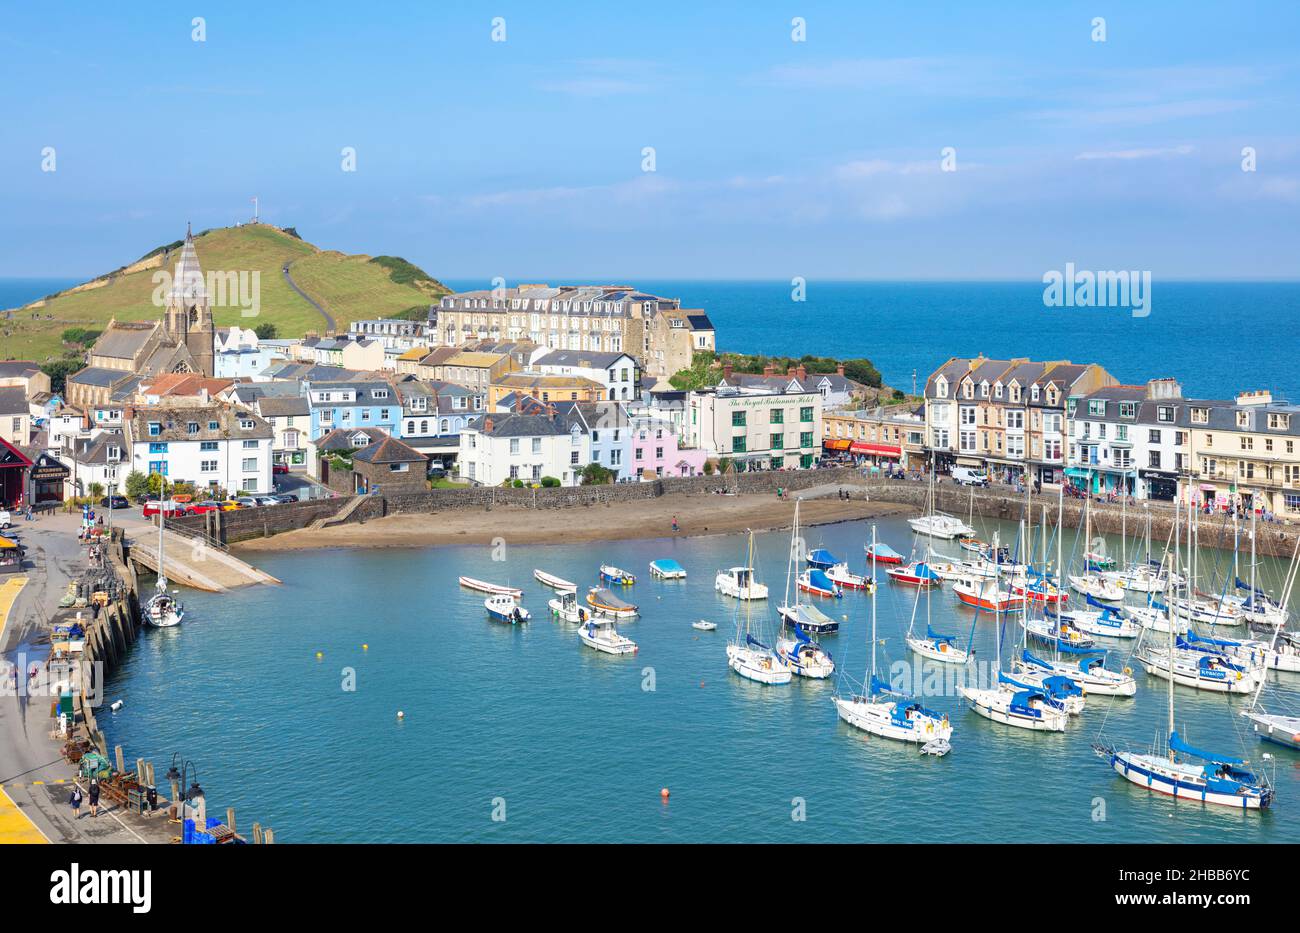 Ilfracombe Devon coast and Ilfracombe harbour viewpoint above the town of Ilfracombe Devon England UK GB Europe Stock Photo